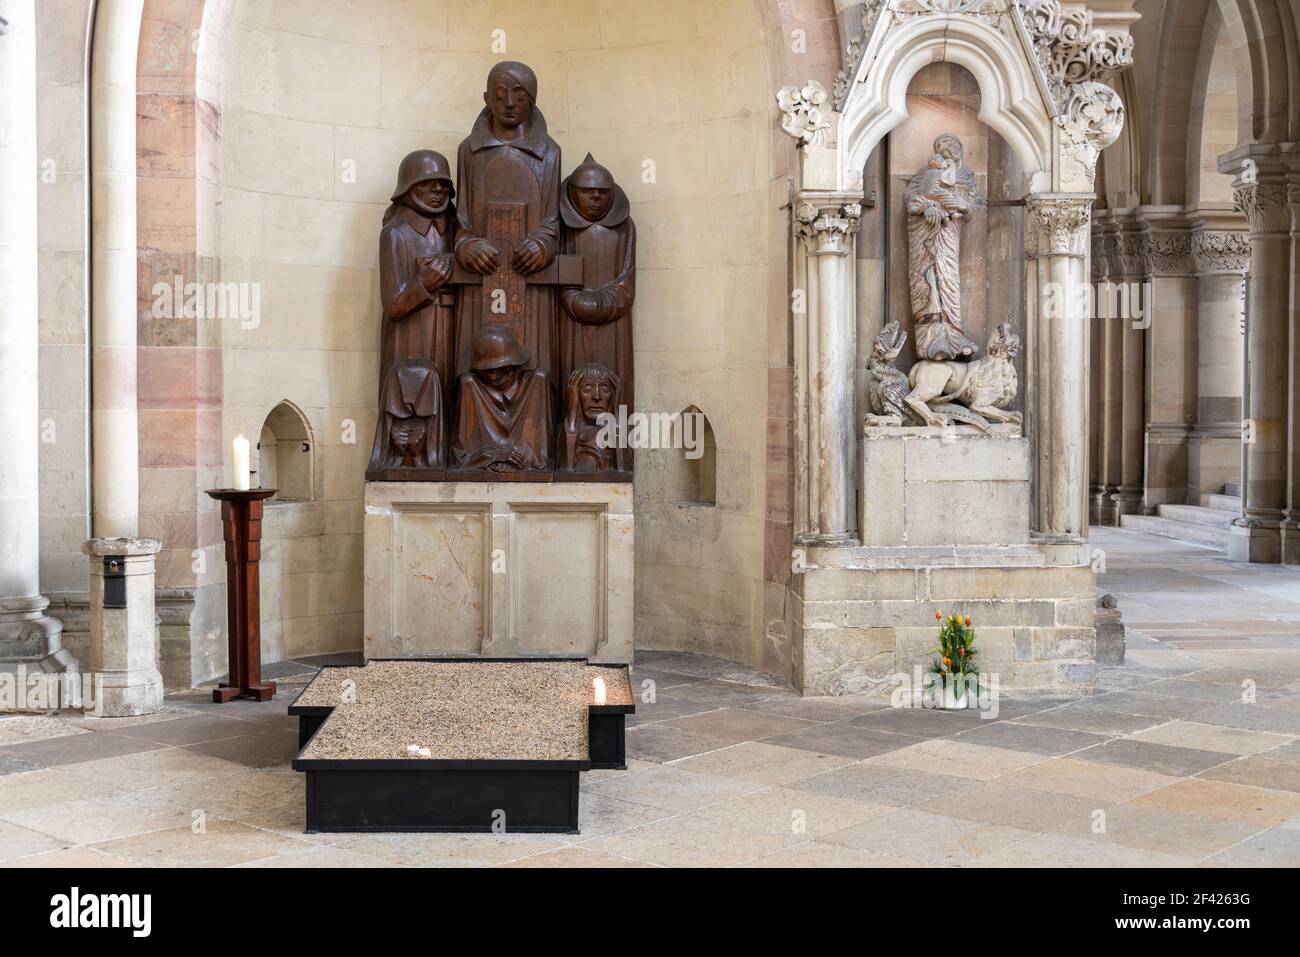 Germany, Saxony-Anhalt, Magdeburg, anti-war monument by Ernst Barlach in Magdeburg Cathedral, inaugurated (1929). Stock Photo